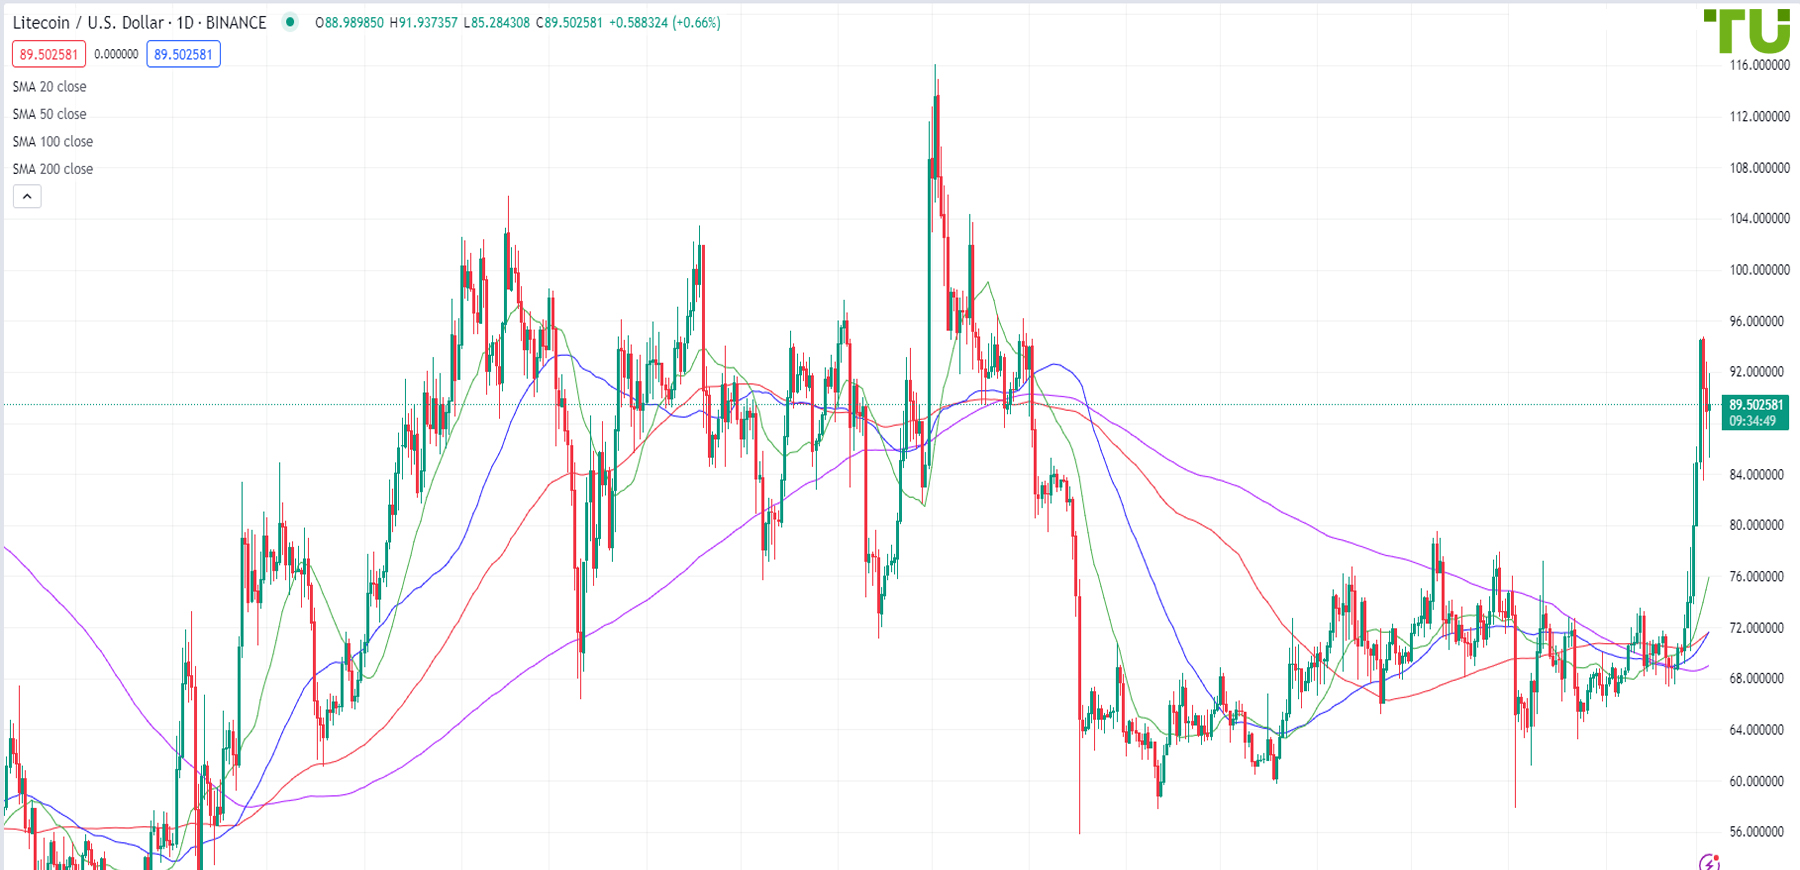 LTC/USD is consolidating after another rise